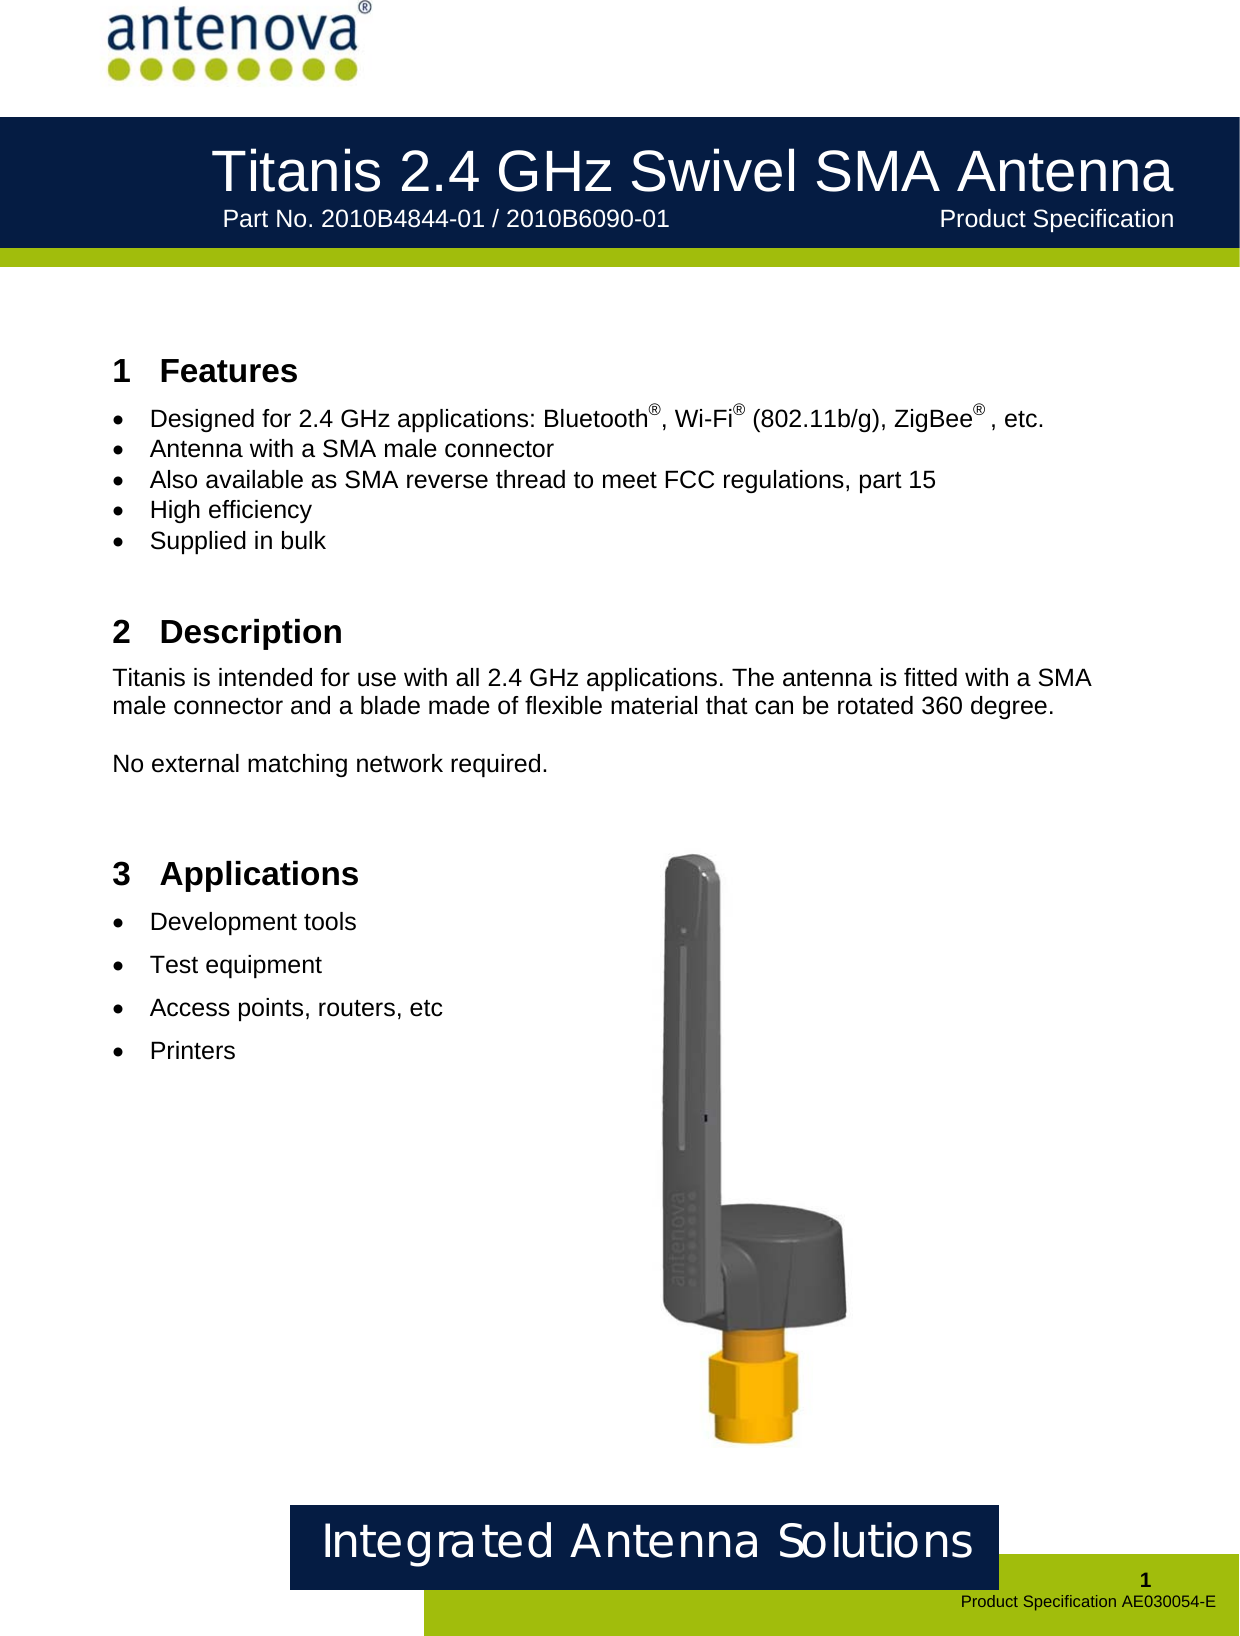     Integrated Antenna Solutions  1 Product Specification AE030054-E Titanis 2.4 GHz Swivel SMA Antenna      Part No. 2010B4844-01 / 2010B6090-01       Product Specification             1  Features •  Designed for 2.4 GHz applications: Bluetooth®, Wi-Fi® (802.11b/g), ZigBee® , etc. •  Antenna with a SMA male connector •  Also available as SMA reverse thread to meet FCC regulations, part 15 • High efficiency •  Supplied in bulk     2  Description Titanis is intended for use with all 2.4 GHz applications. The antenna is fitted with a SMA male connector and a blade made of flexible material that can be rotated 360 degree.   No external matching network required.   3  Applications • Development tools • Test equipment • Access points, routers, etc • Printers         